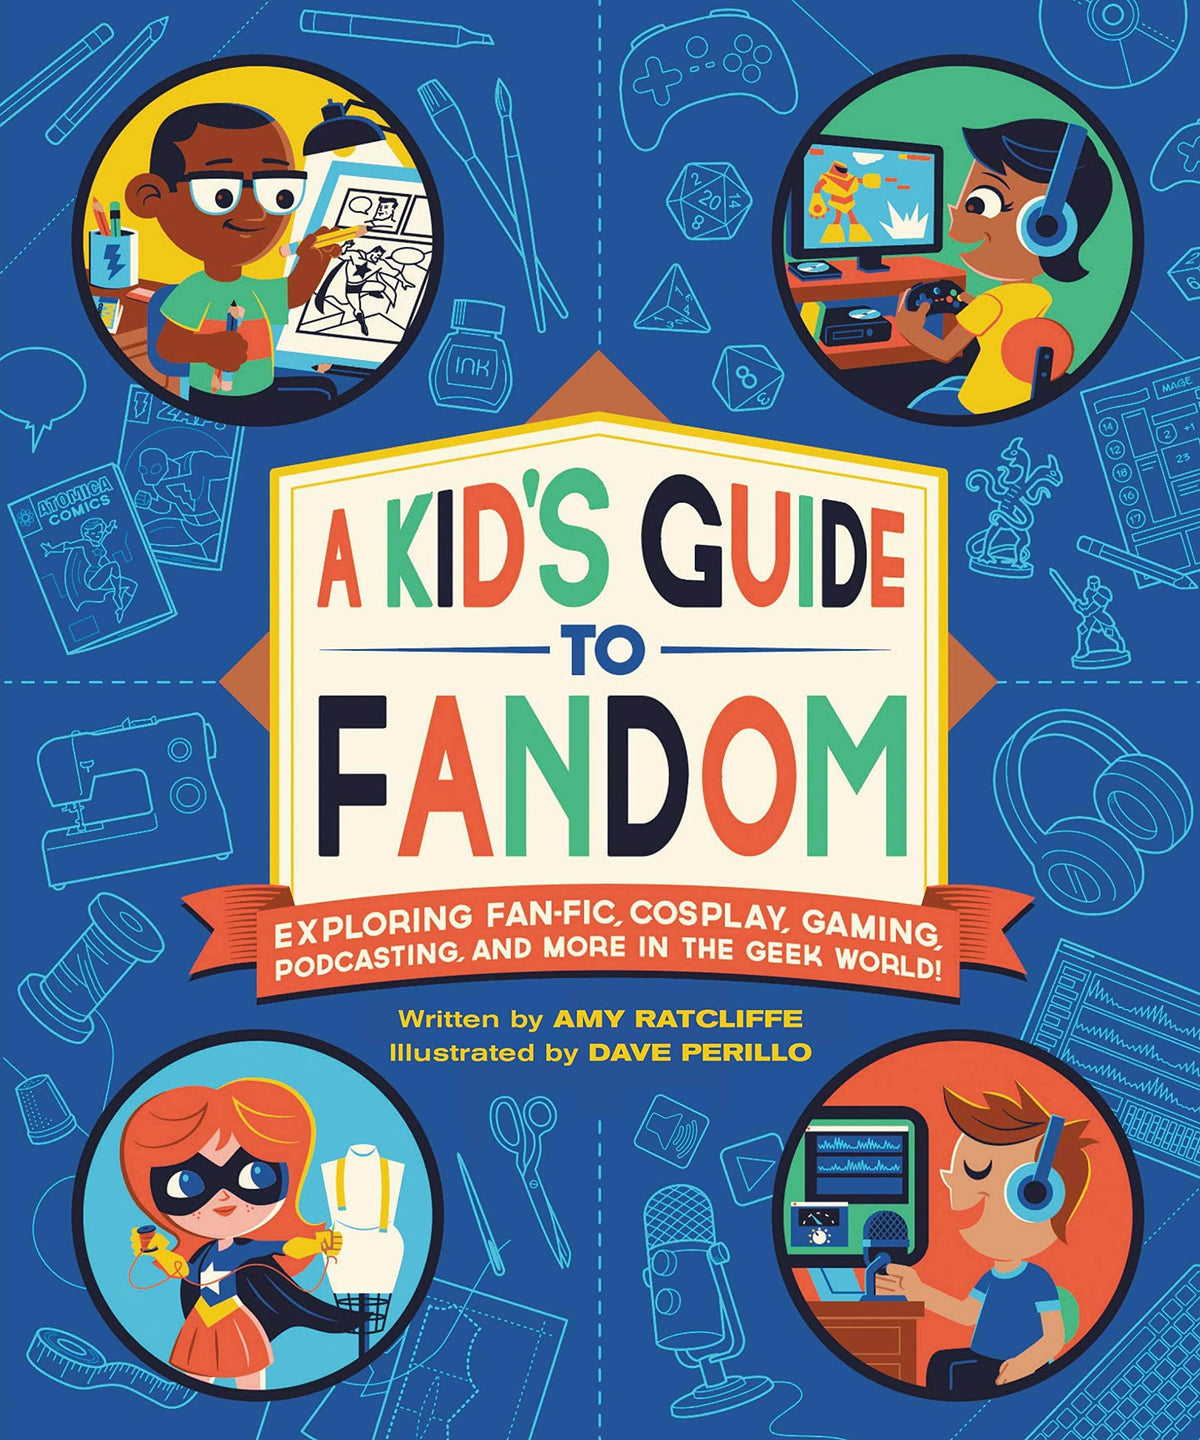 Kid's Guide to Fandom by Amy Ratcliffe - Third Eye